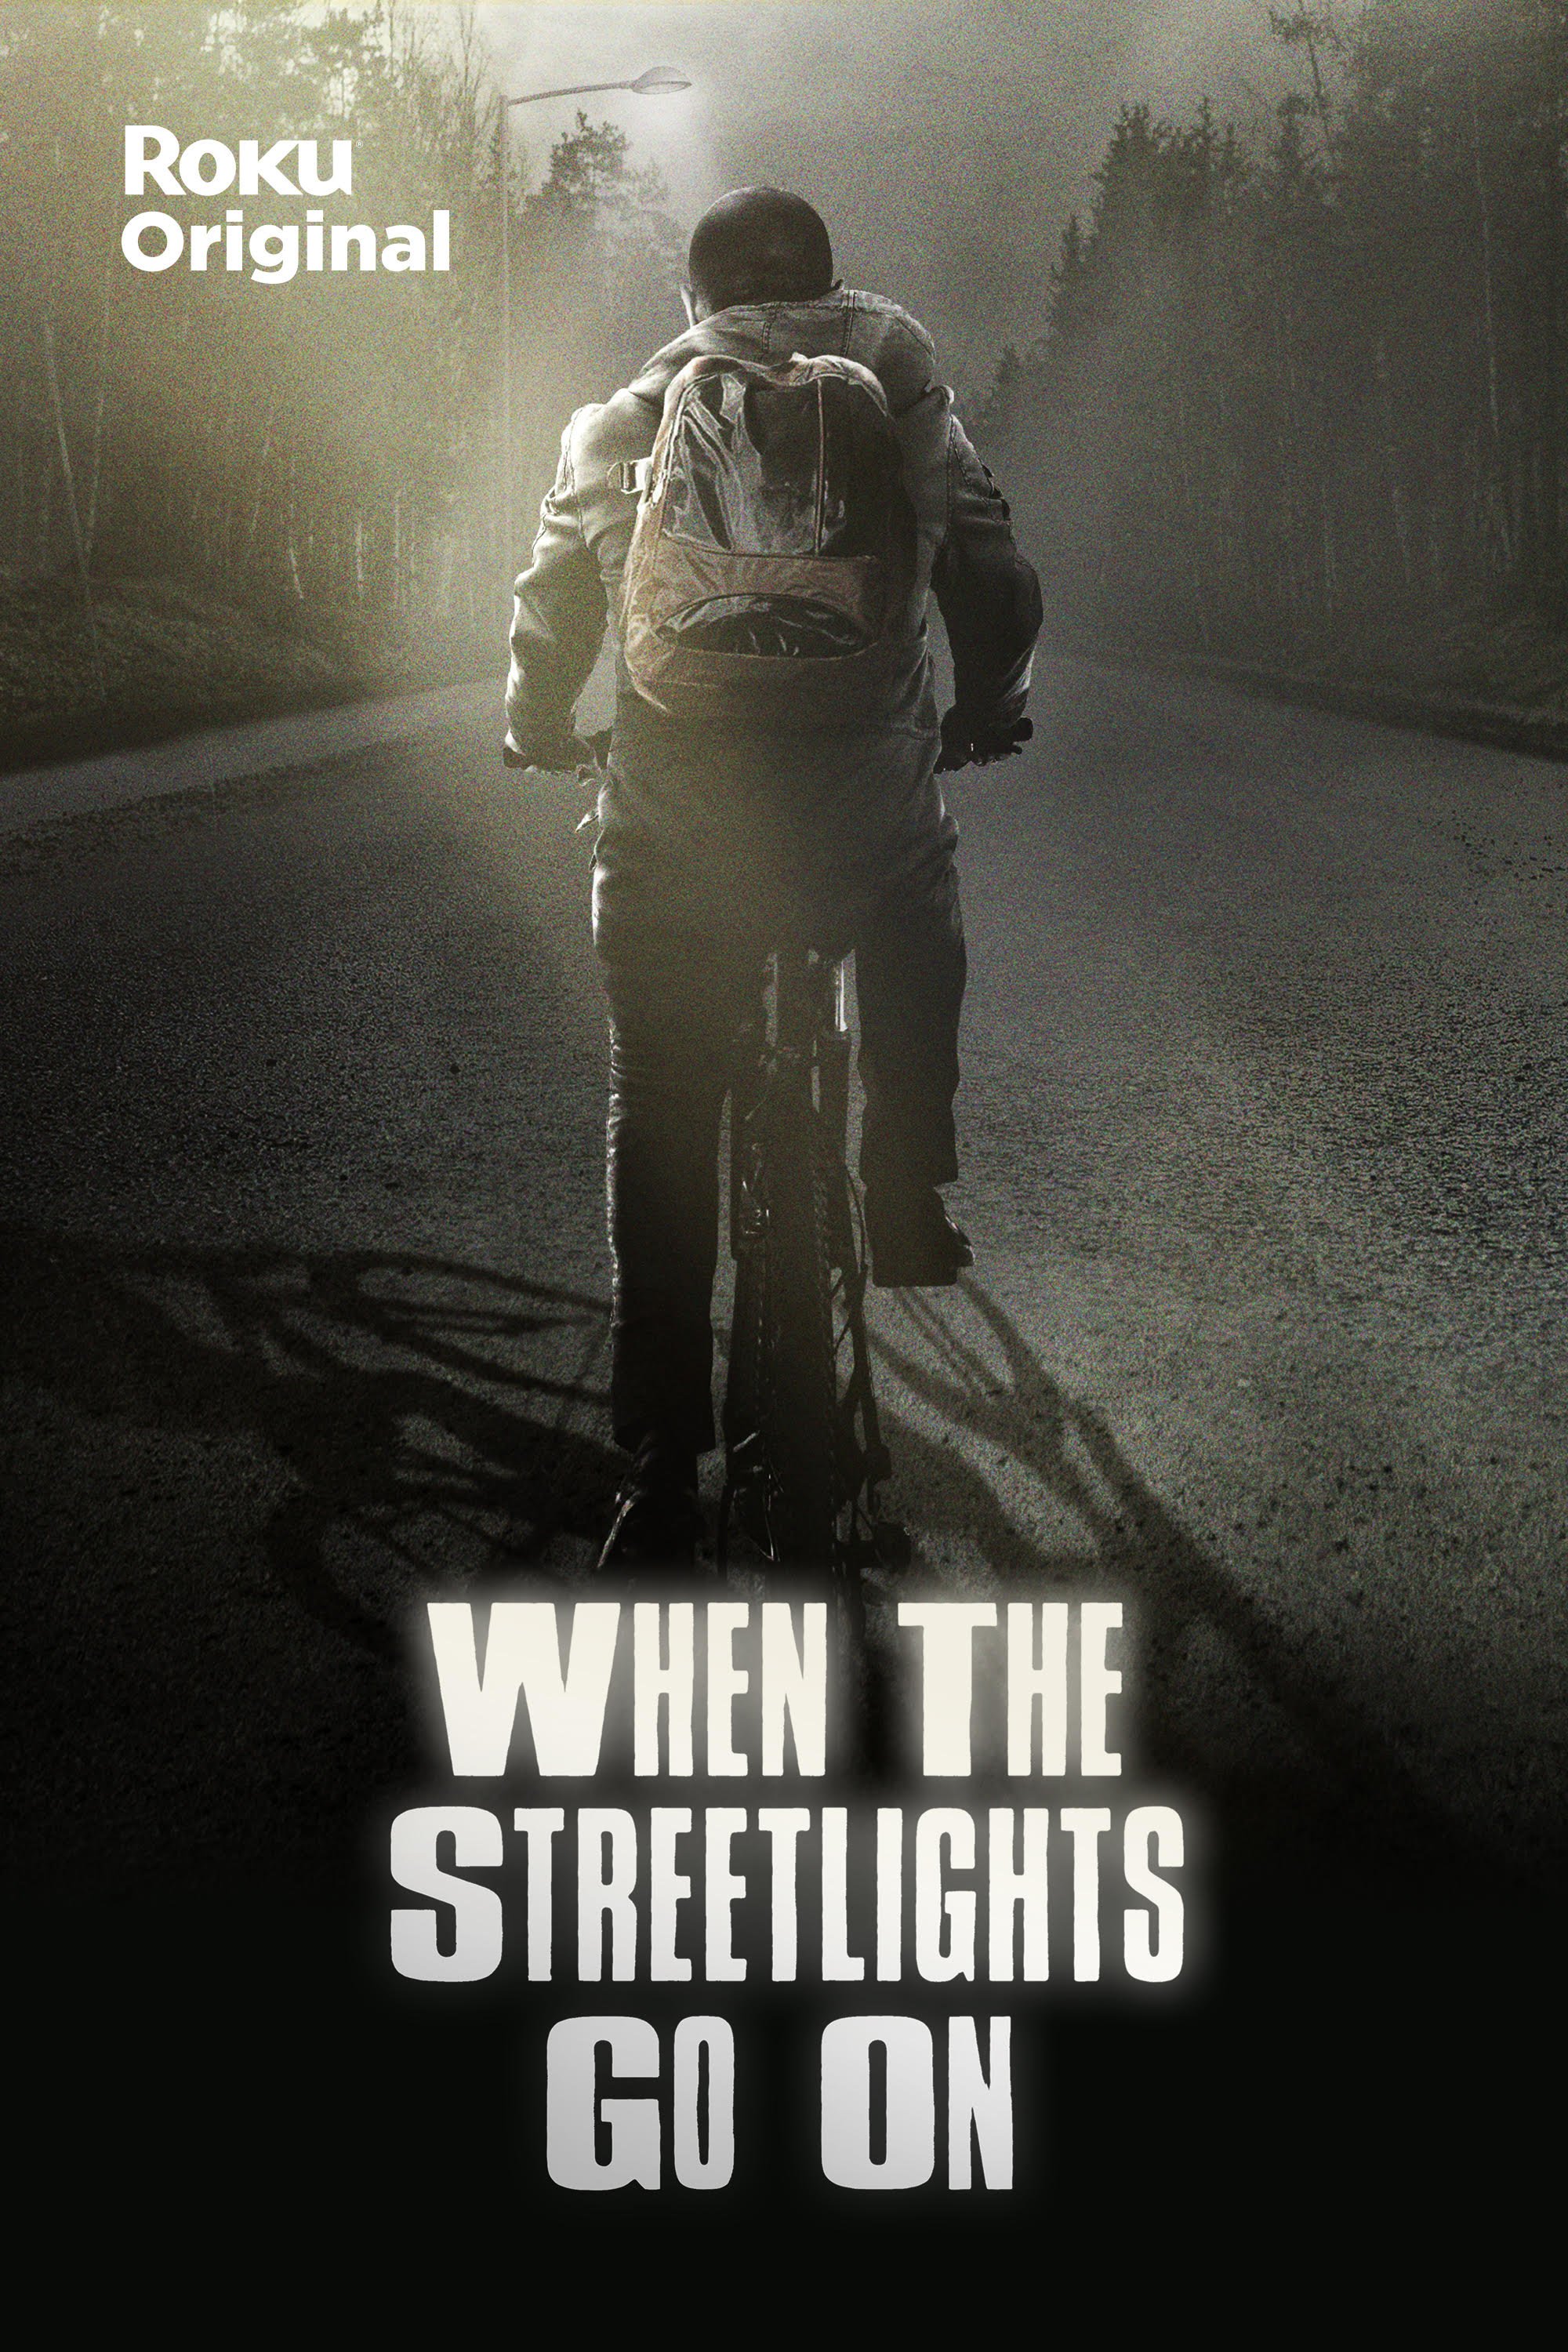 A boy rides his bike down a darkened street in the promo poster for the Roku Channel original 'When the Streetlights Go On'